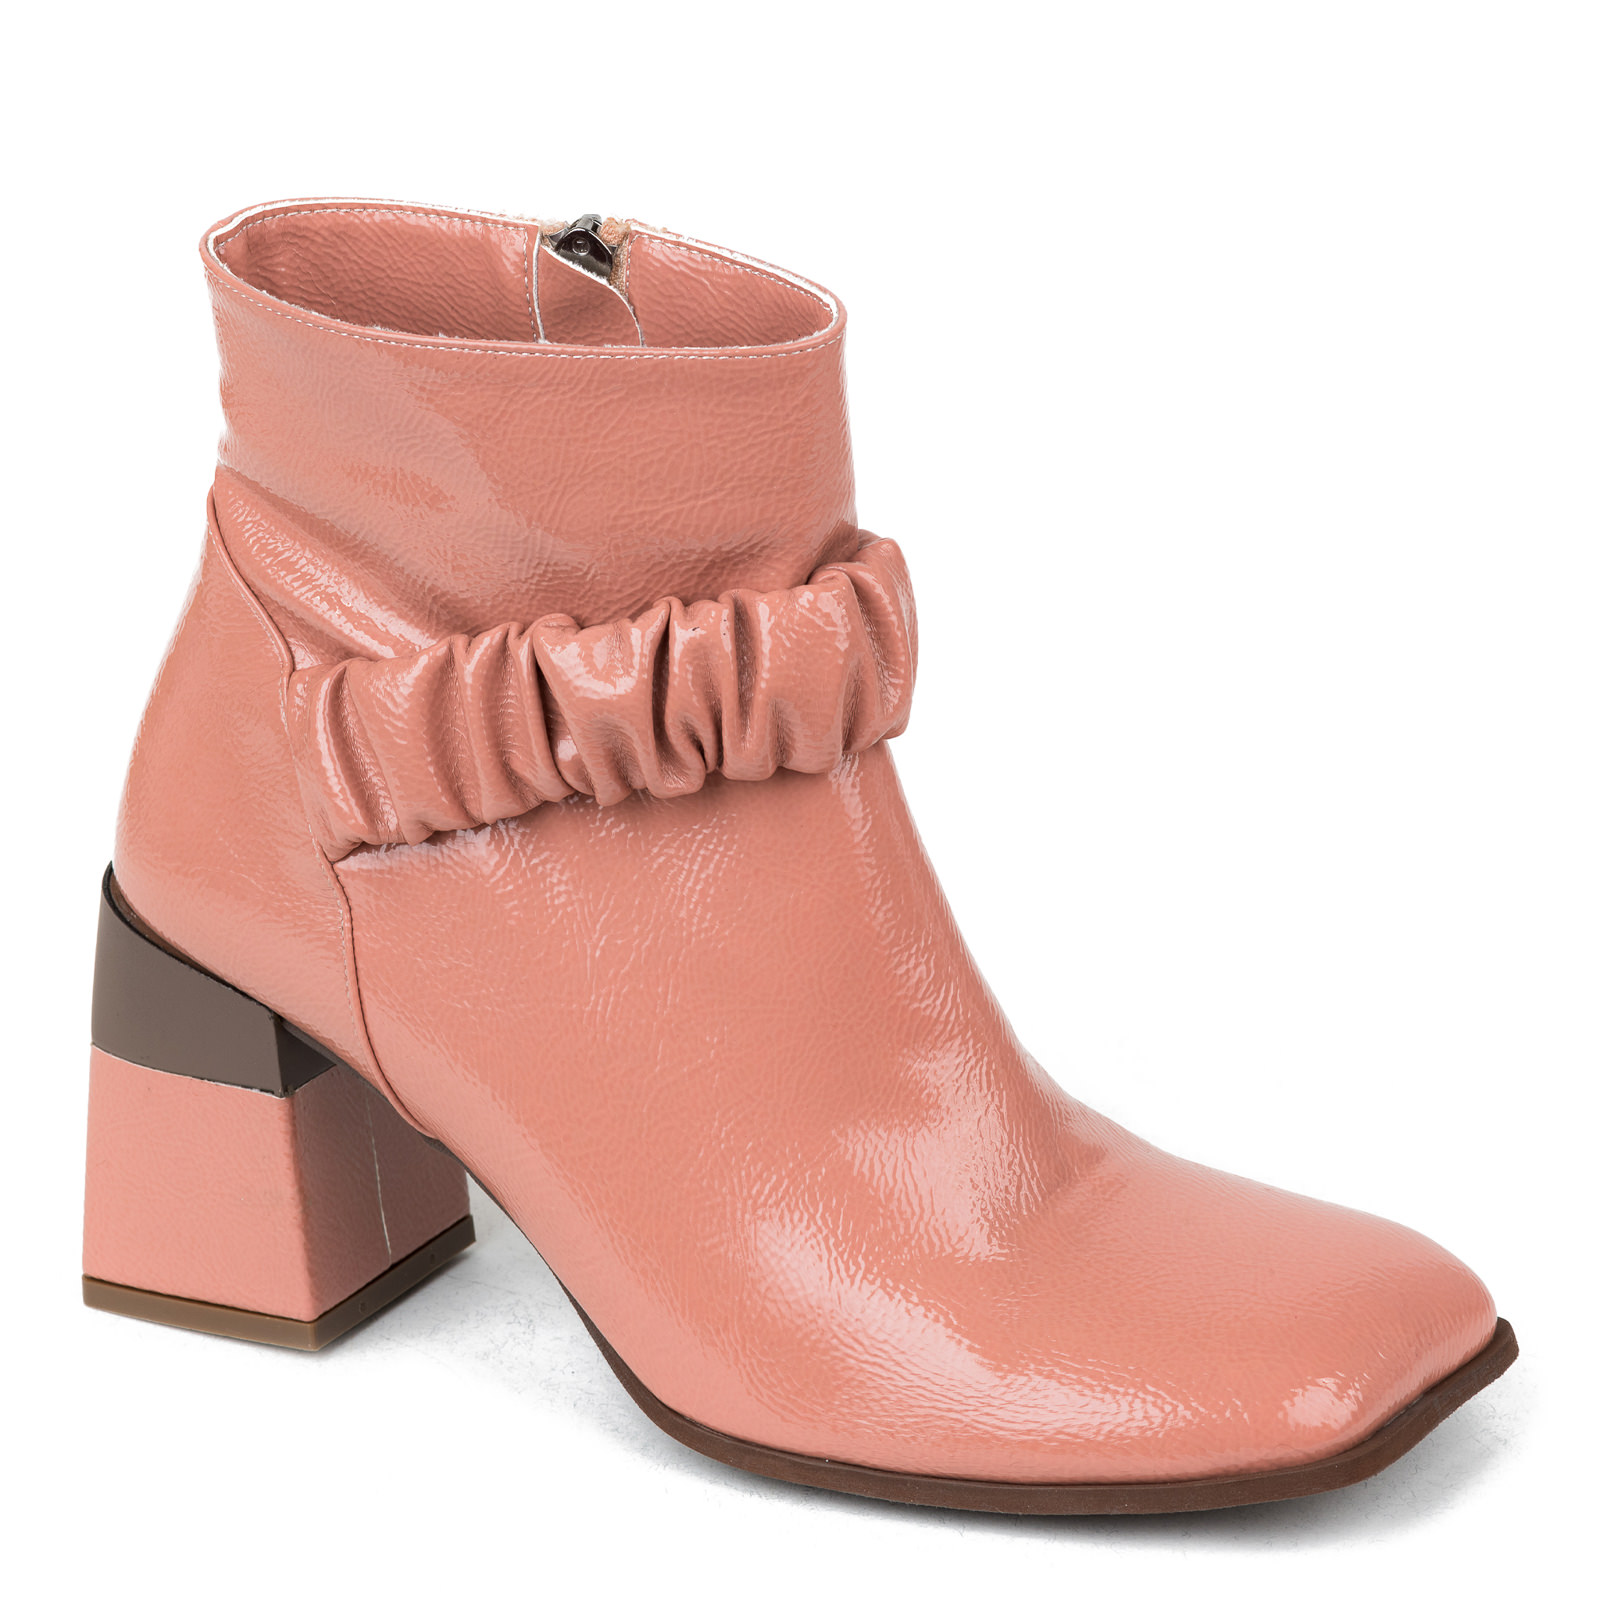 Women ankle boots B489 - ROSE